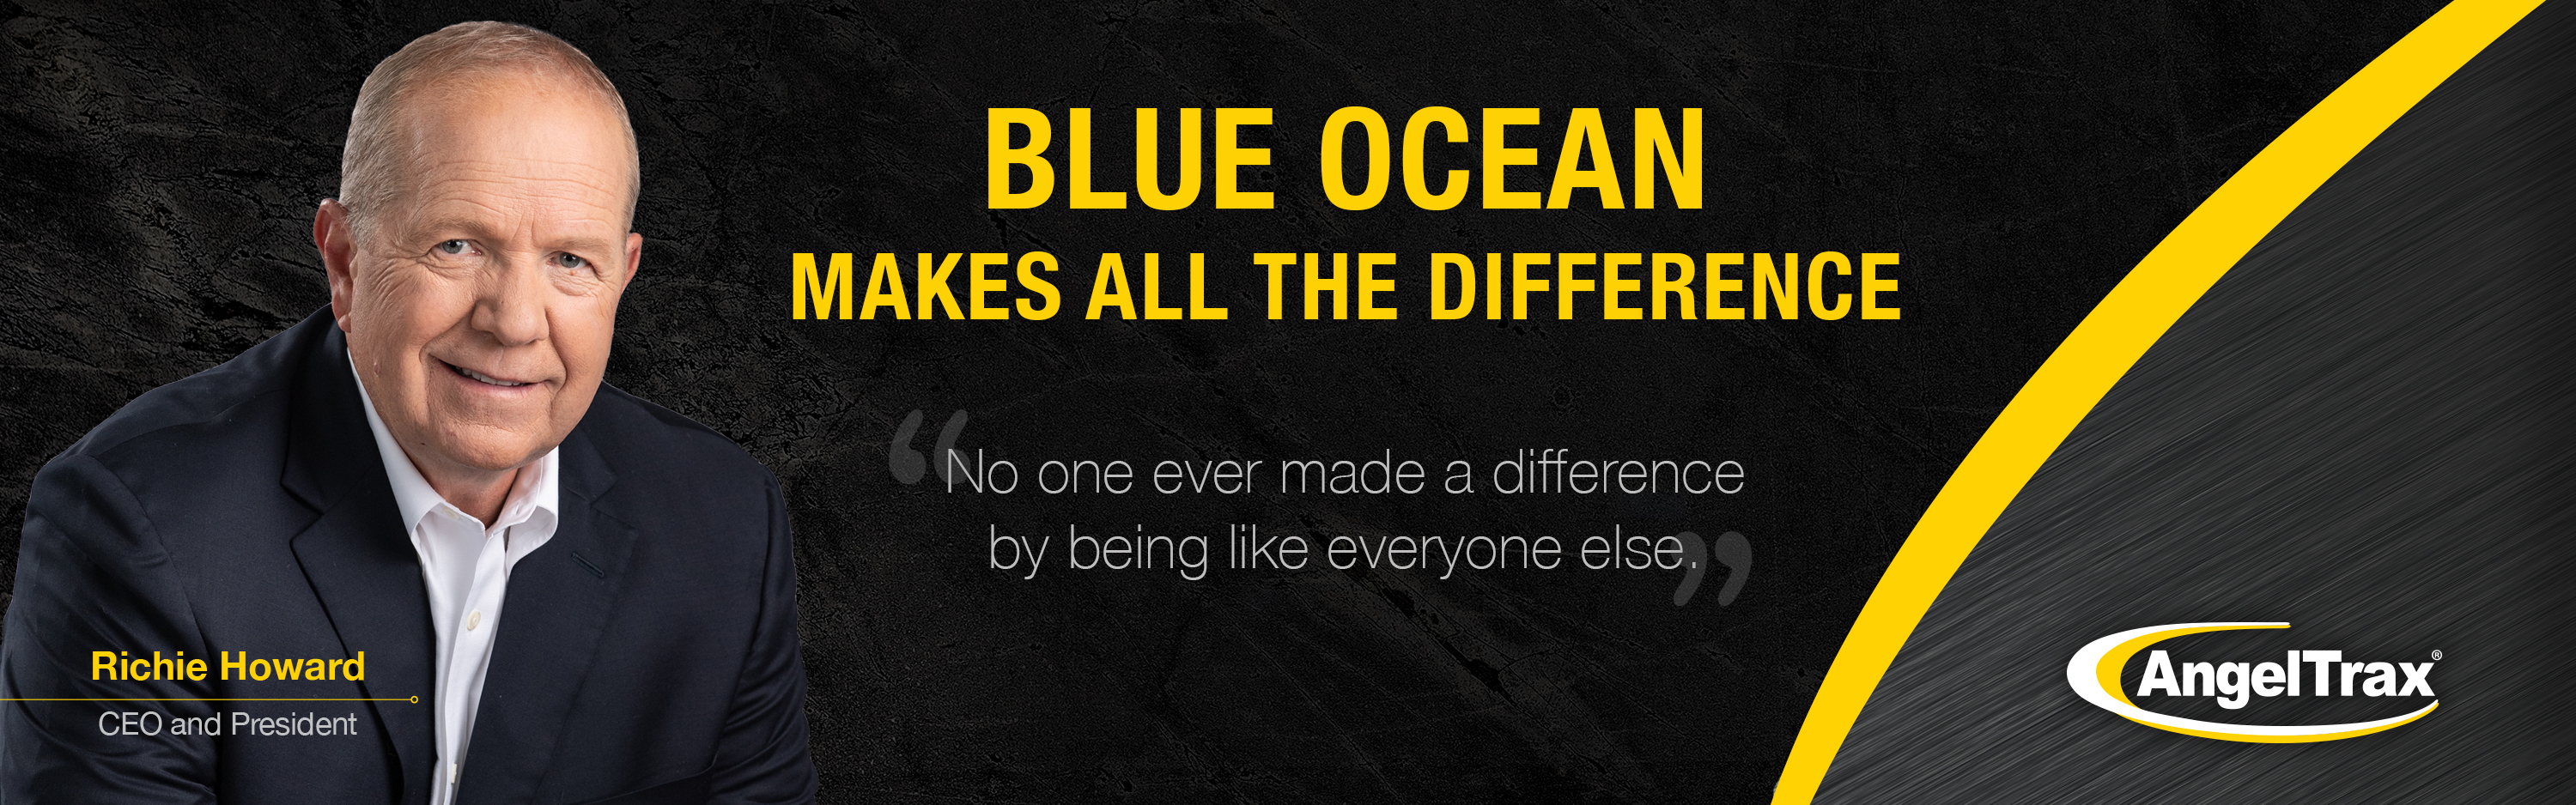 photo of CEO on banner reading 'blue ocean makes all the difference'